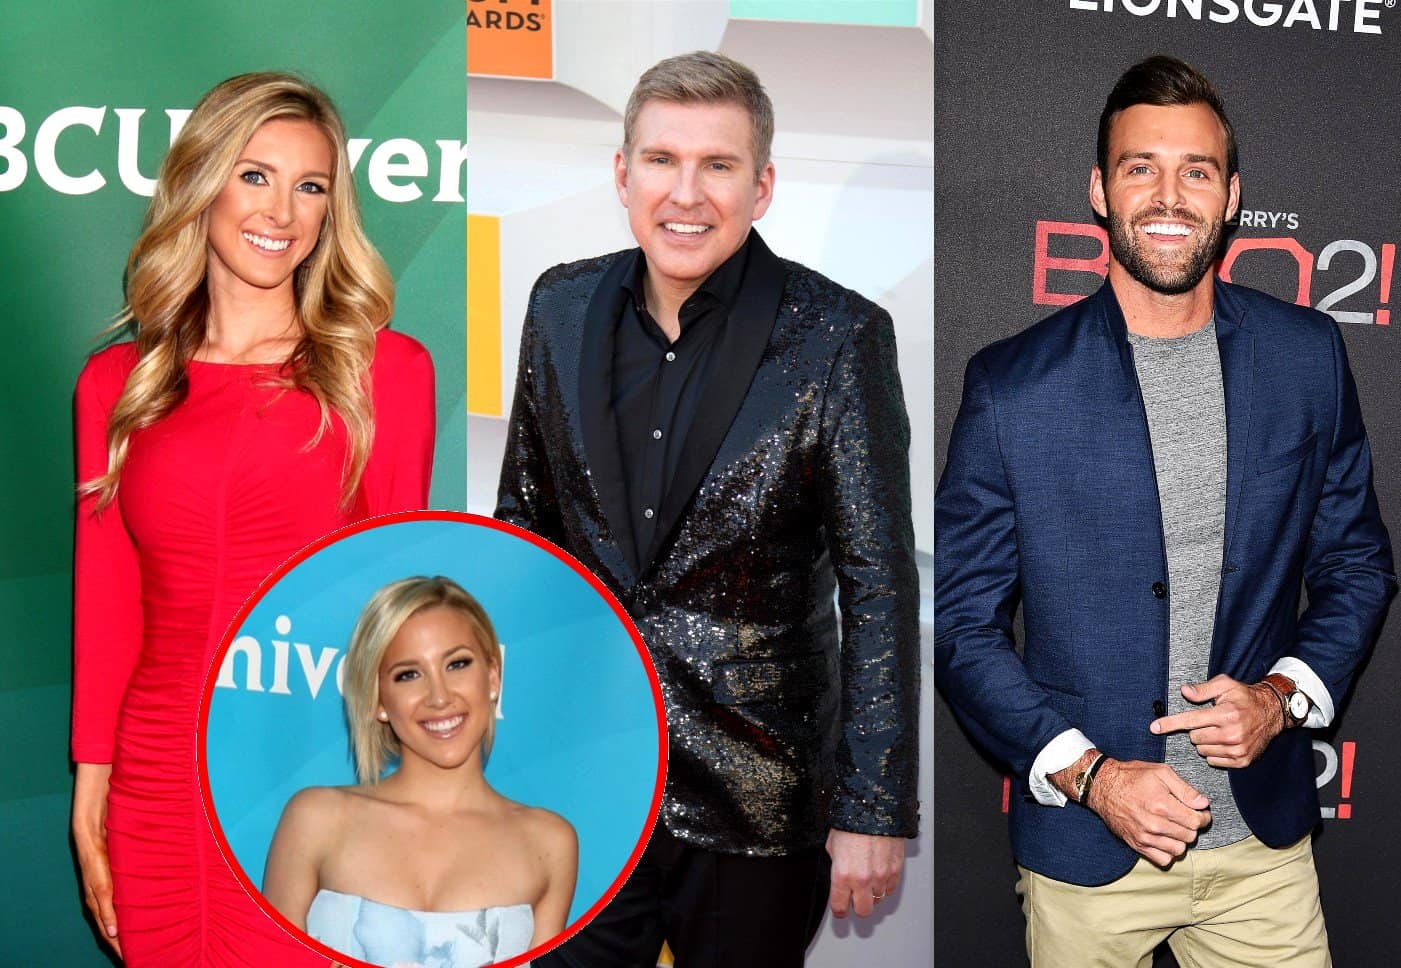 Lindsie Chrisley accuses her father, Chrisley Knows Best star Todd Chrisley, of u...